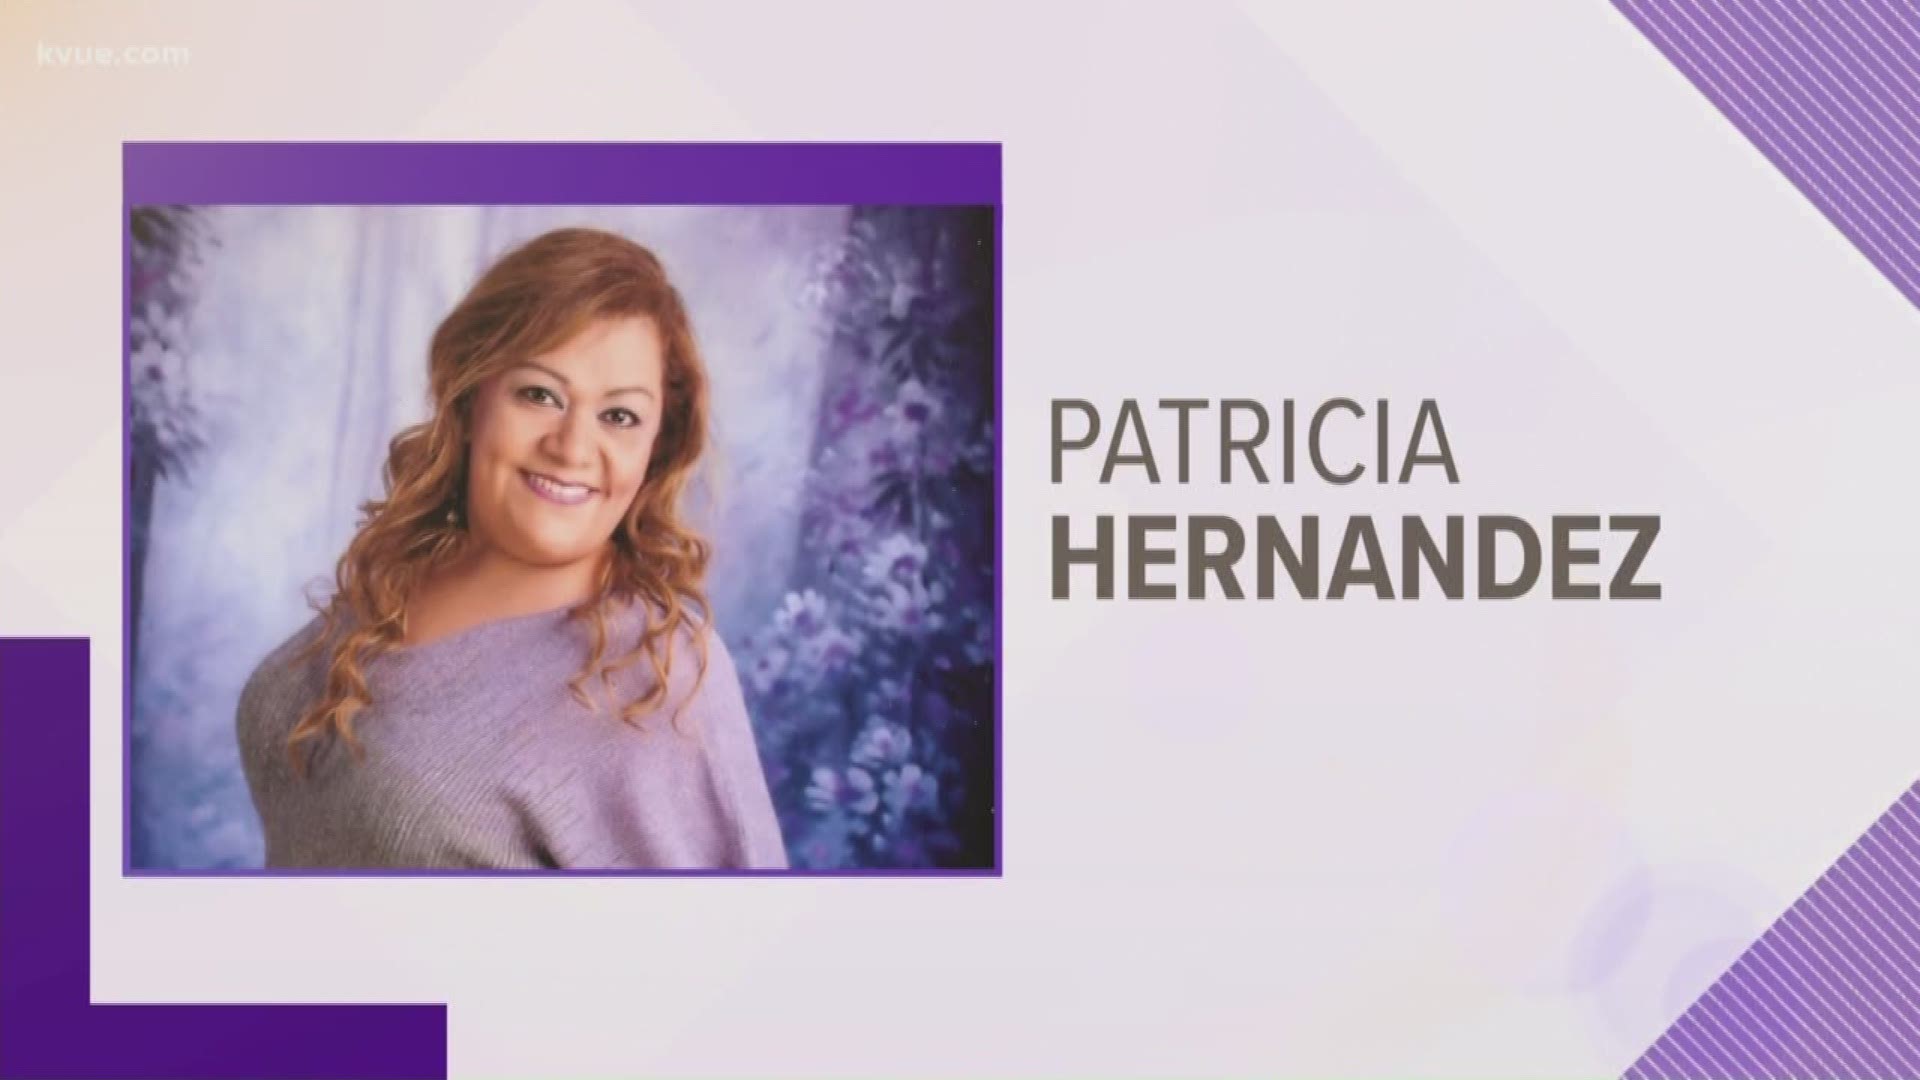 Patricia Hernandez was a food service worker at Casis Elementary for 10 years.